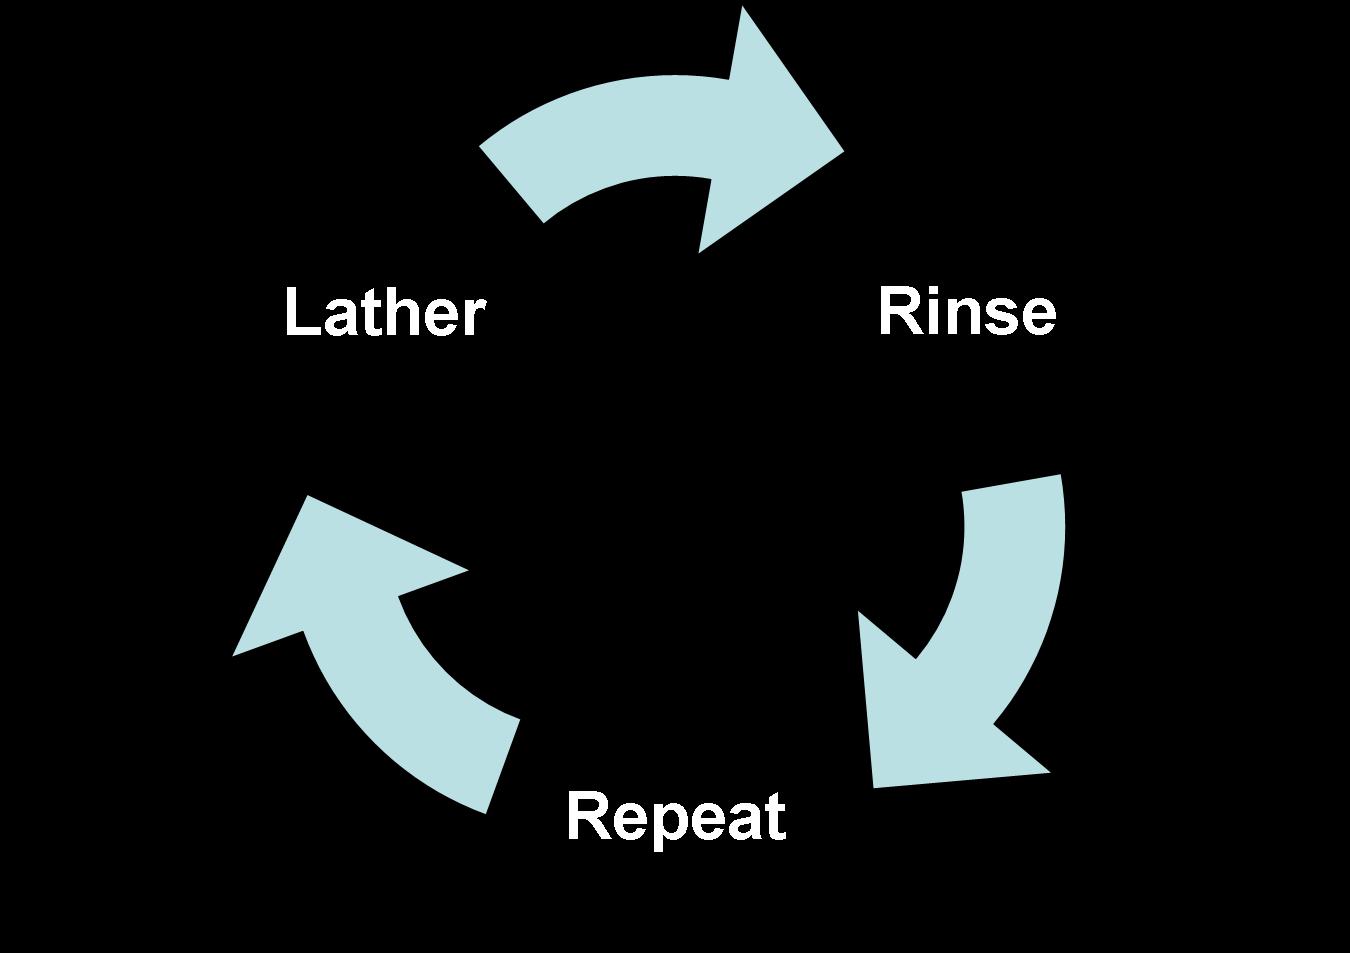 Rinse, lather repeat, a process that goes on indefinitely